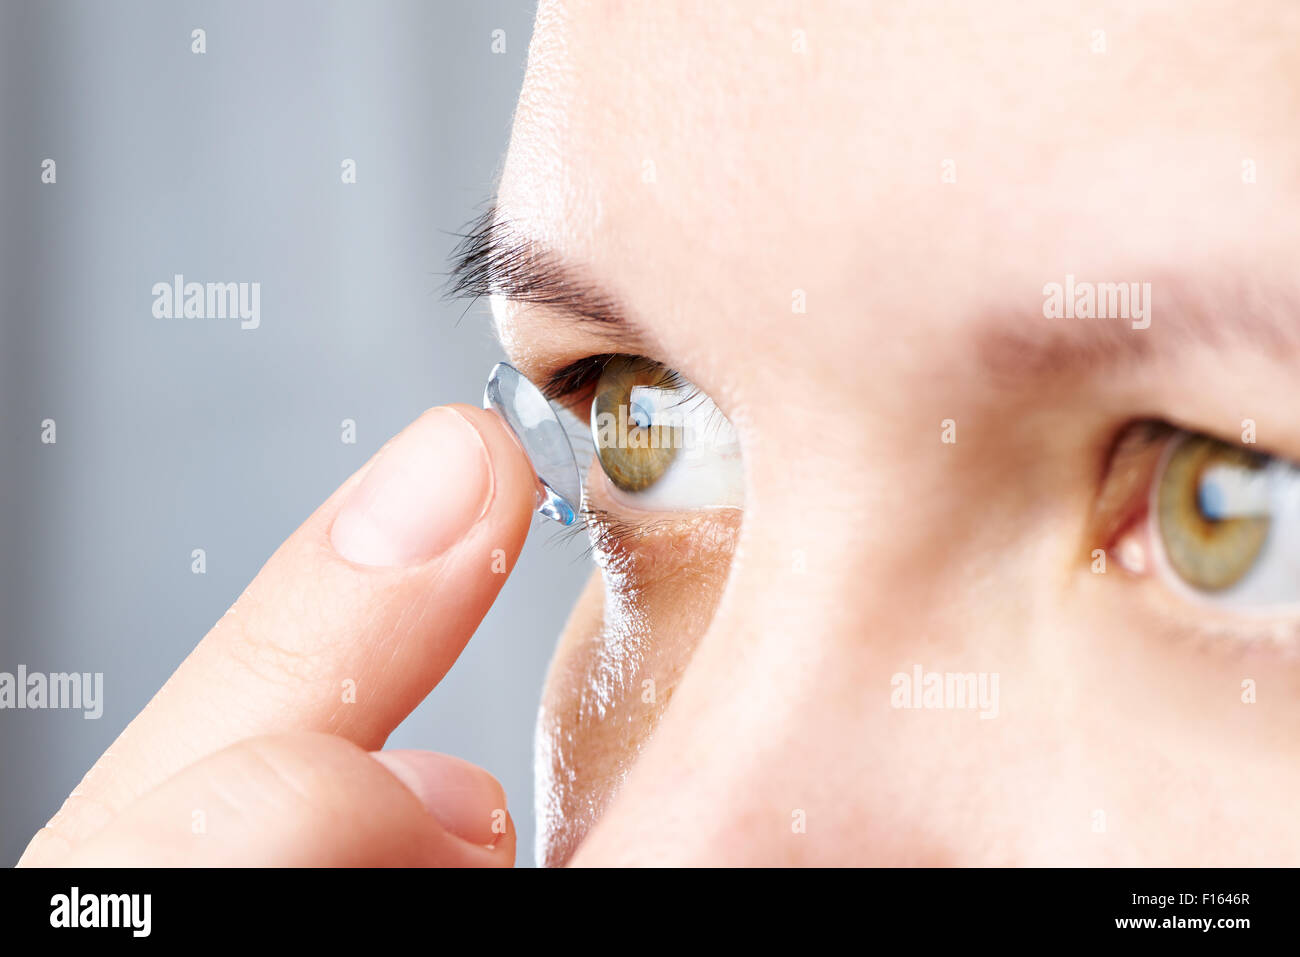 Medicine and vision - young woman with contact lens Stock Photo